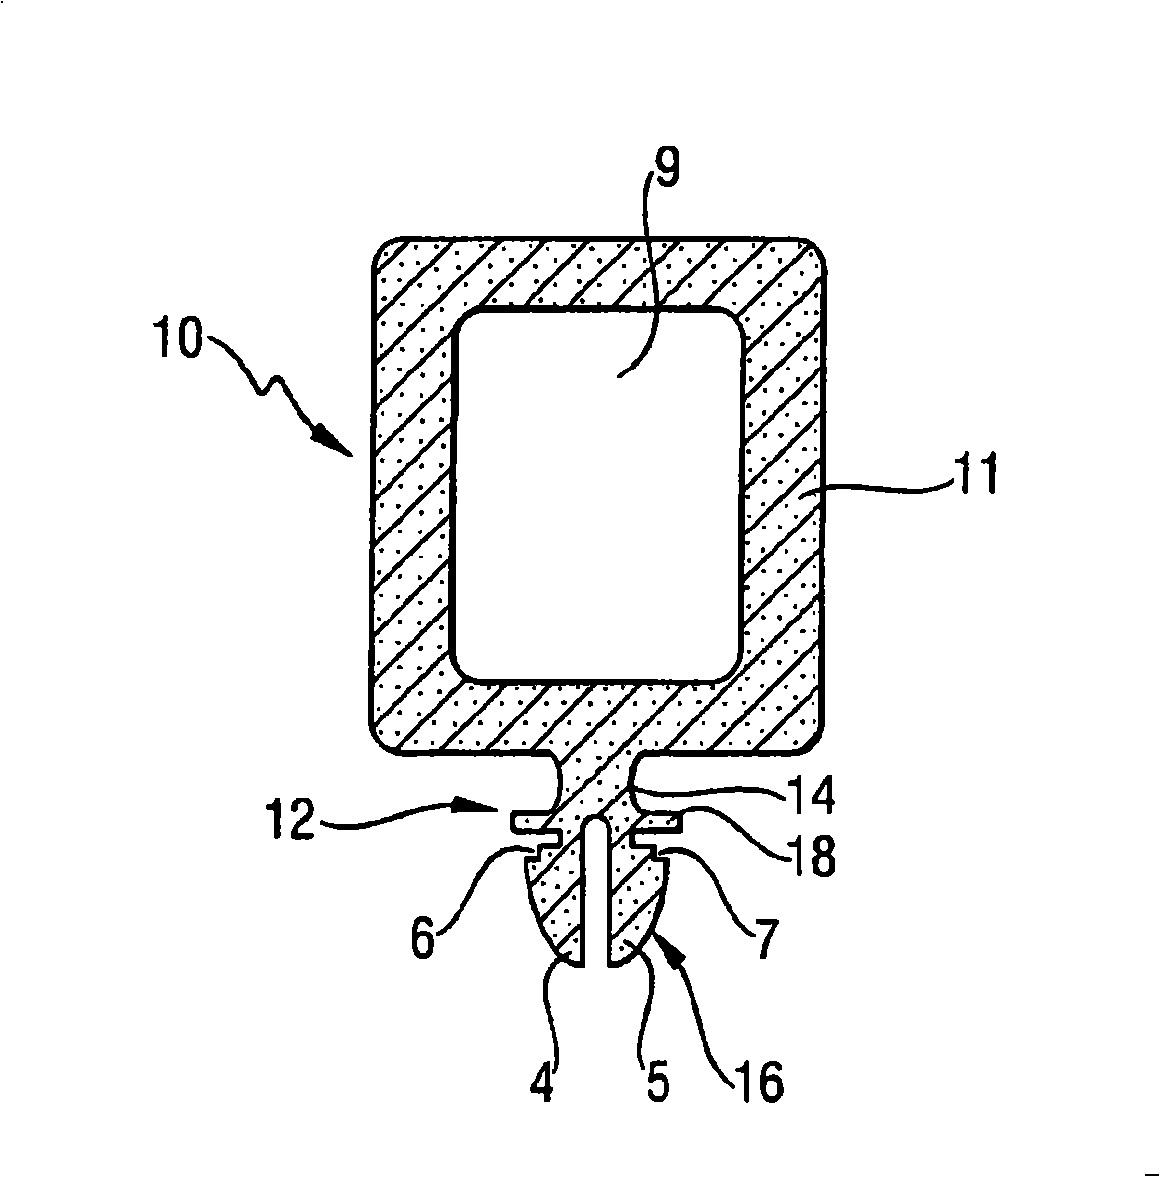 Expandable filler insert and methods of producing the expandable filler insert